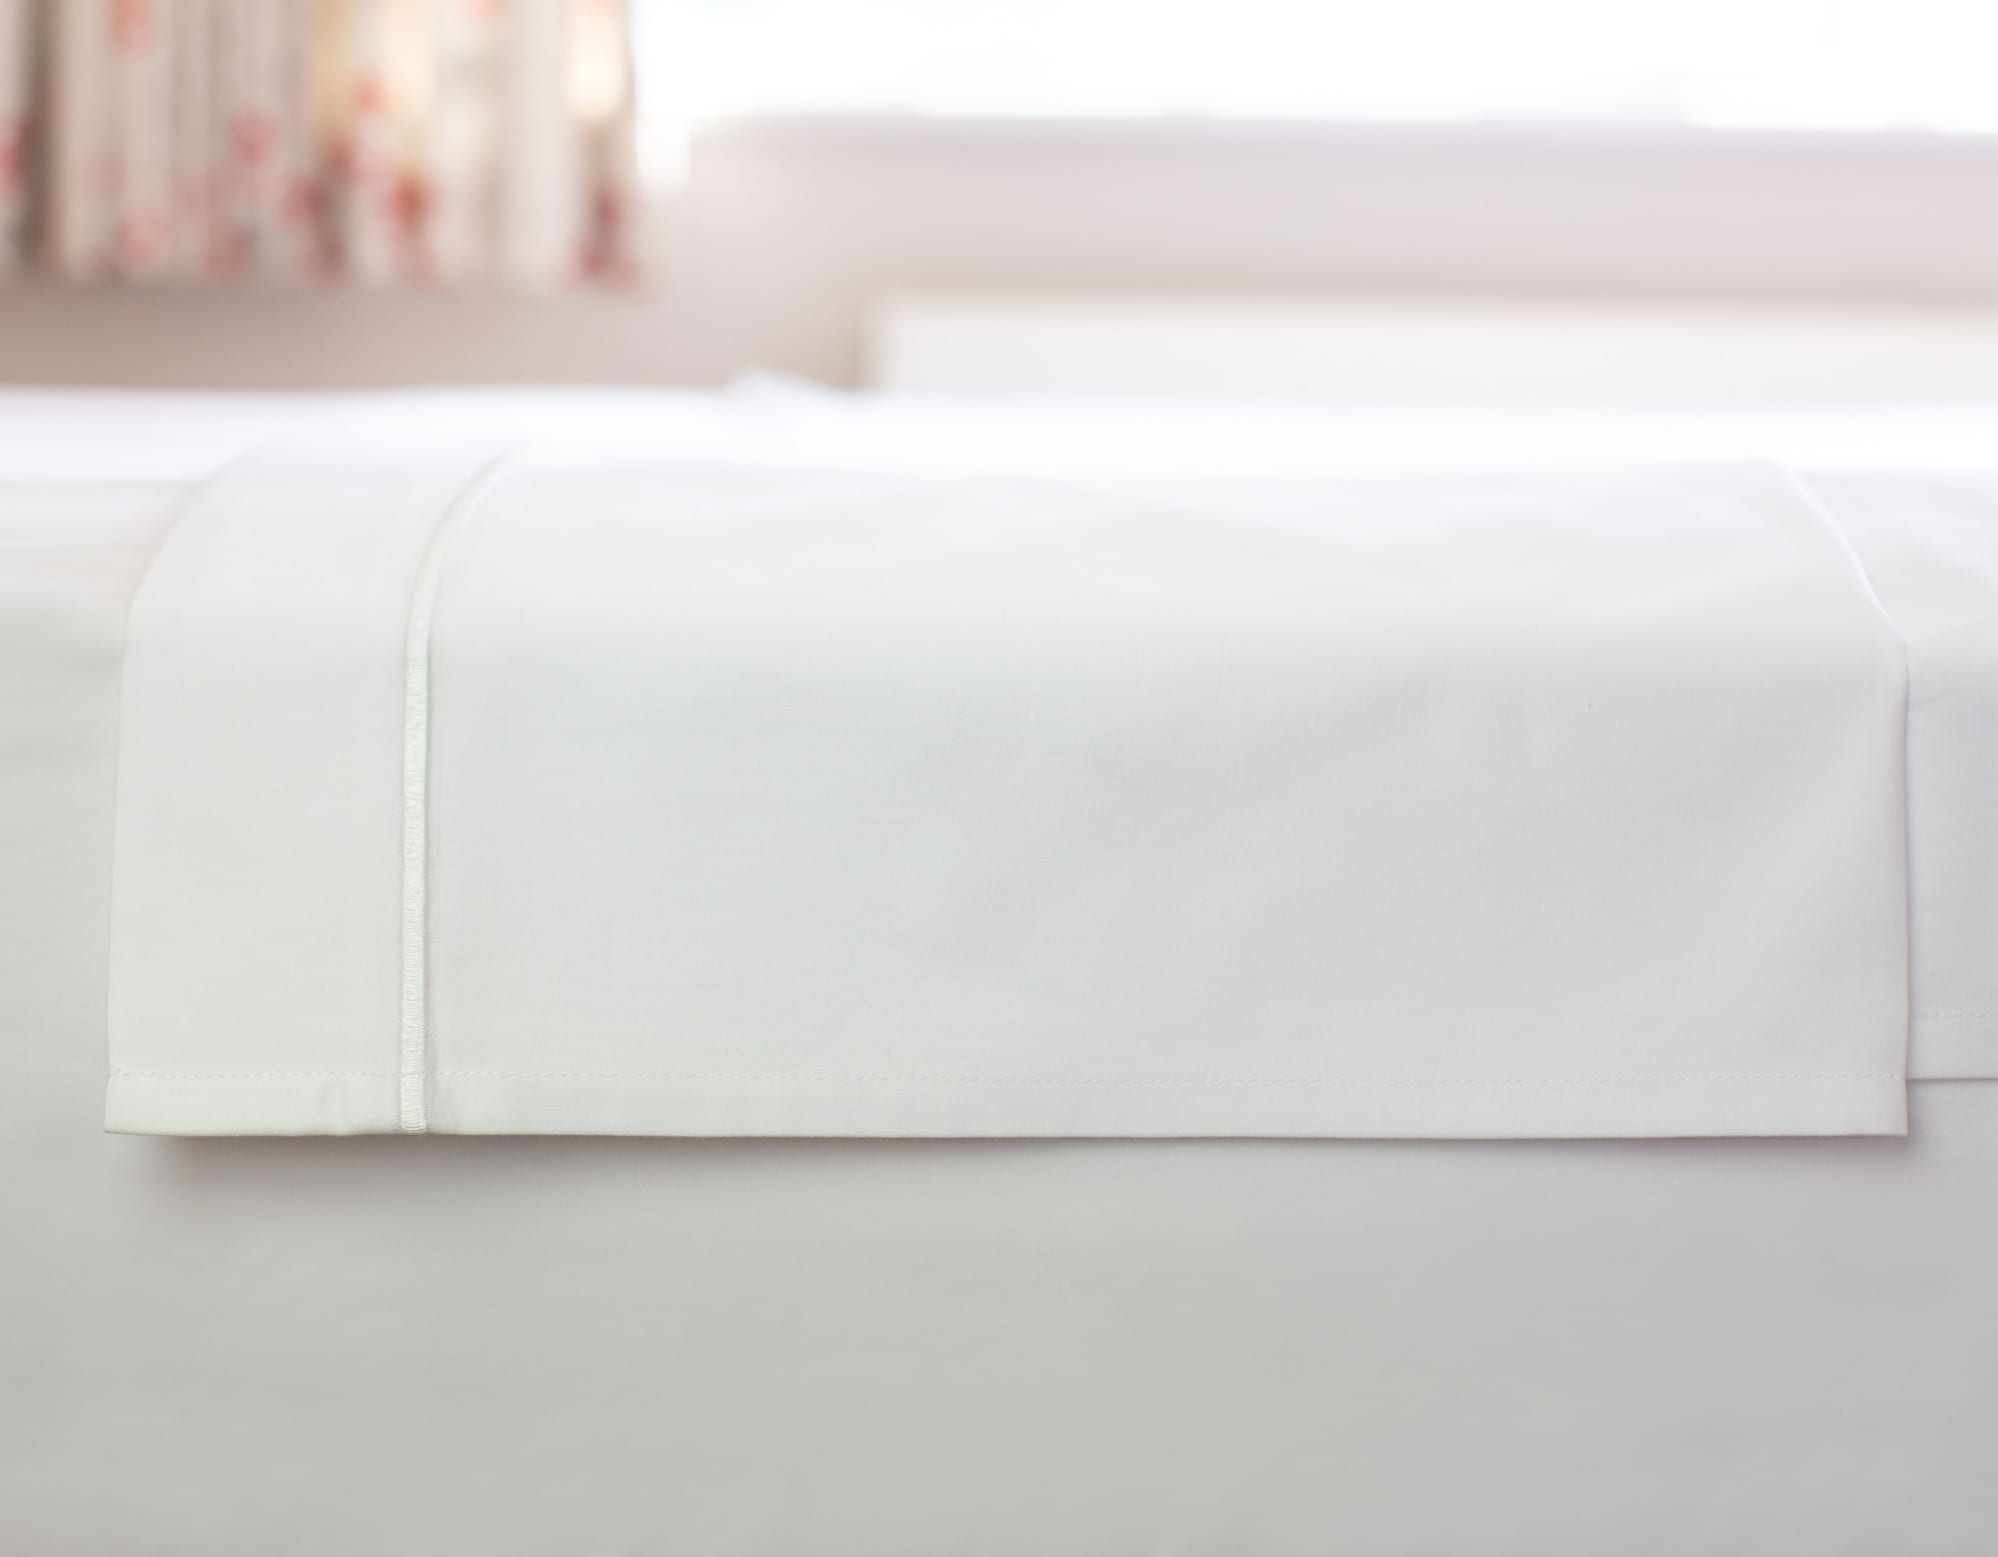 White Egyptian cotton flat sheet folded showing oxford border with marrow stitching